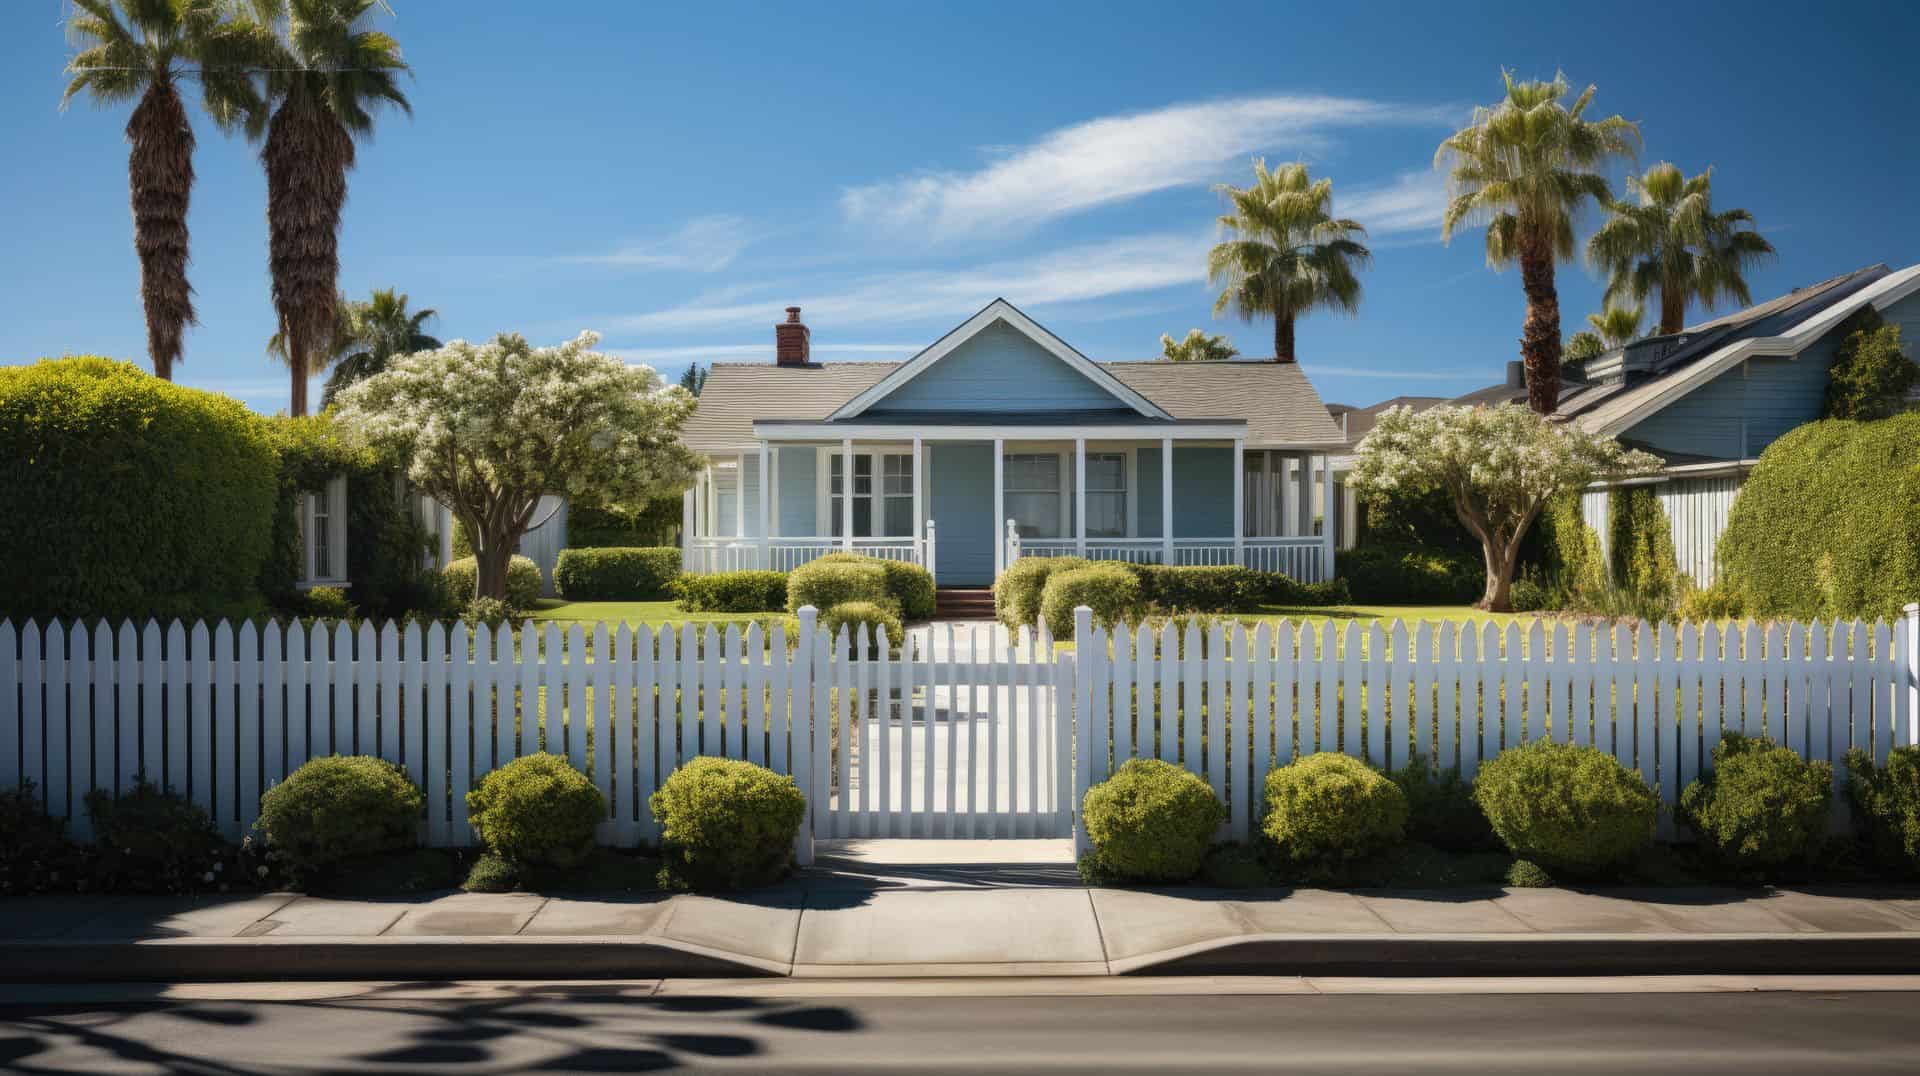 Vinyl picket fence surrounding ranch style suburban house in front of grassy lawn with small gate on concrete sidewalk